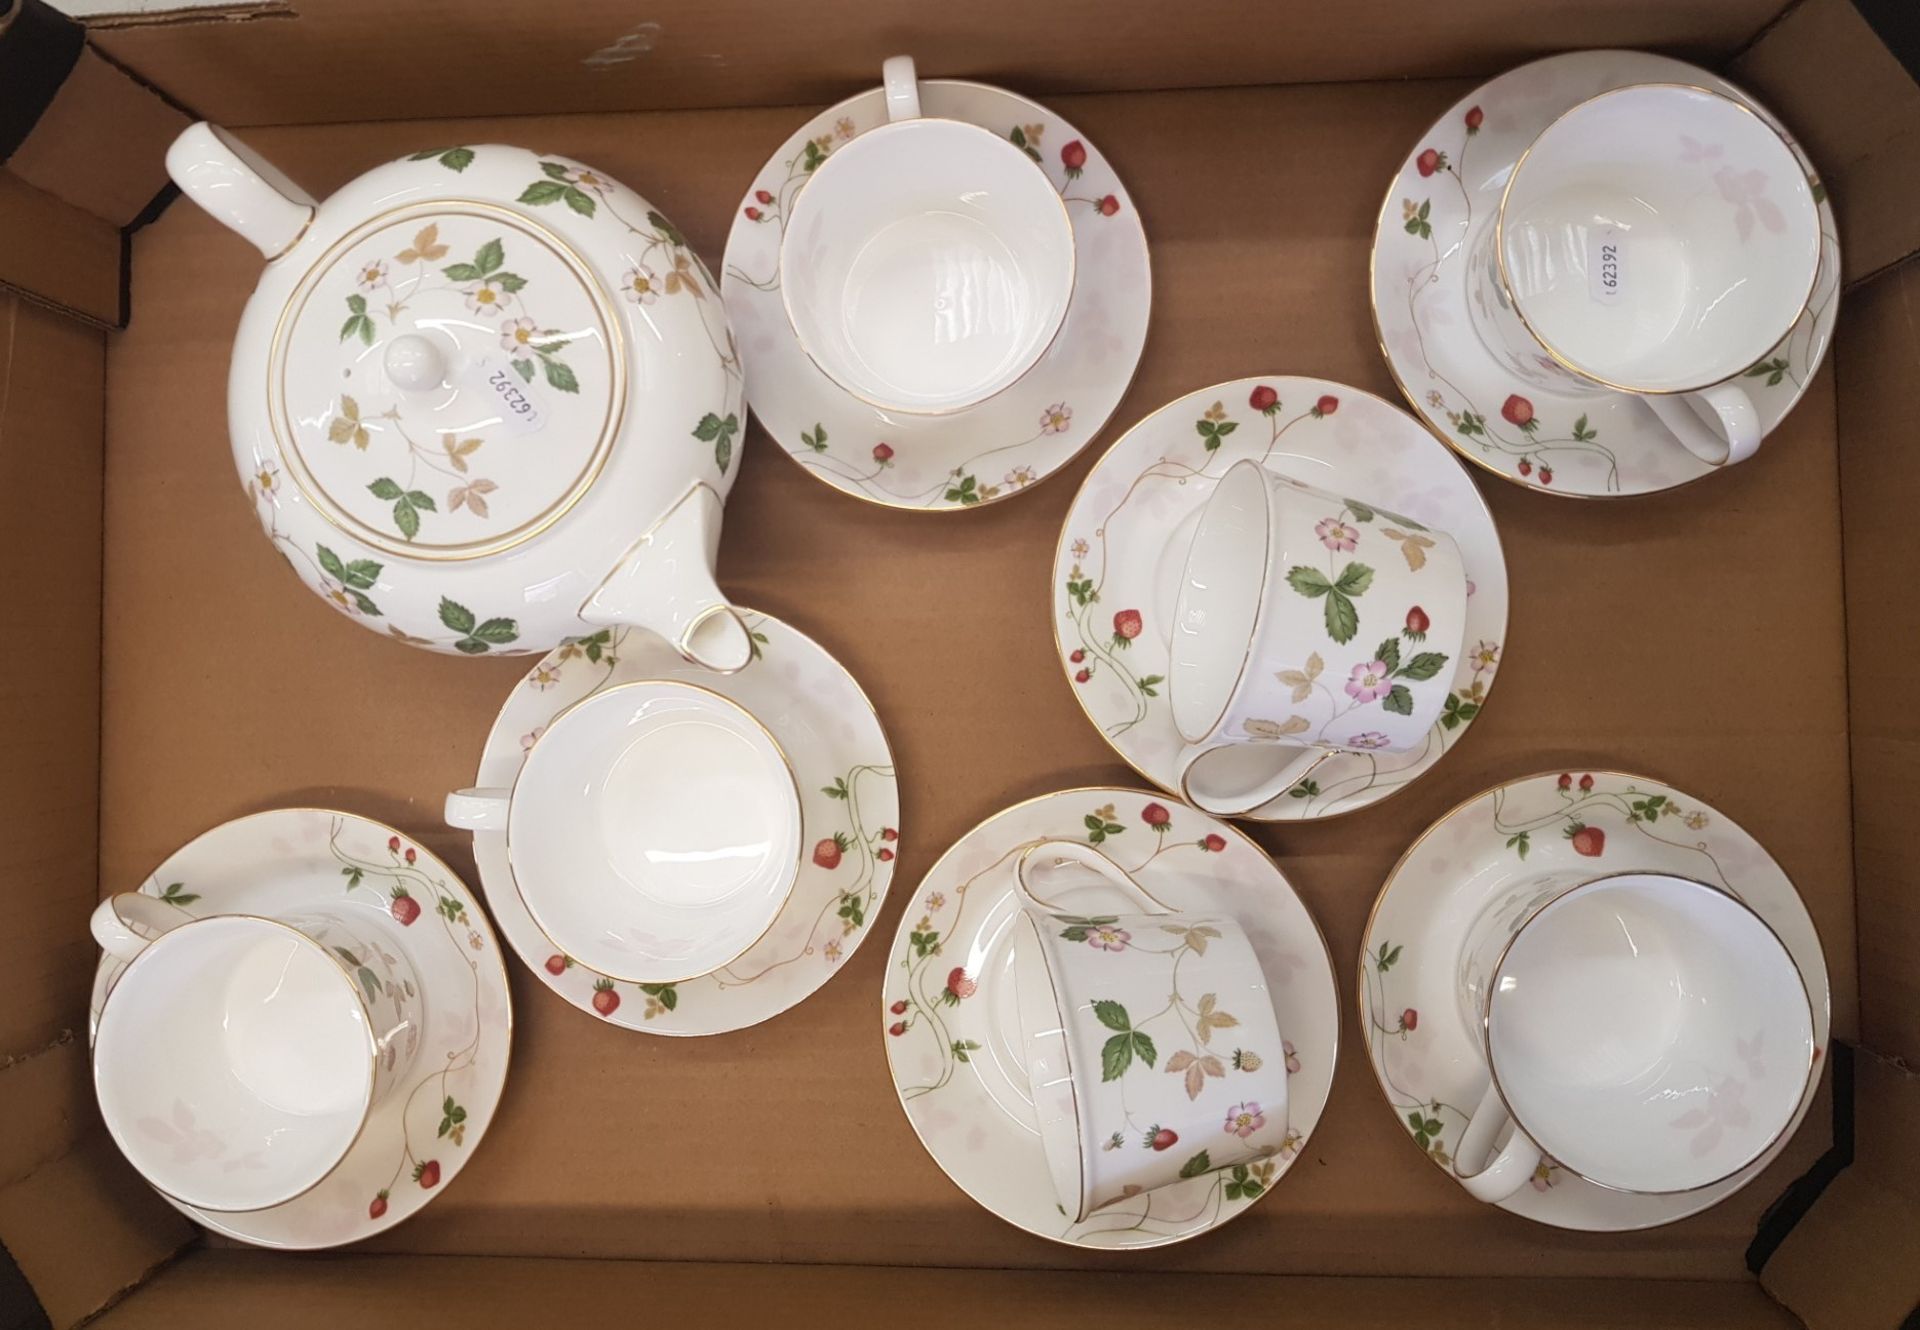 Wedgwood Wild Strawberry pattern teapot, 7 cups and 7 saucers (1 tray).